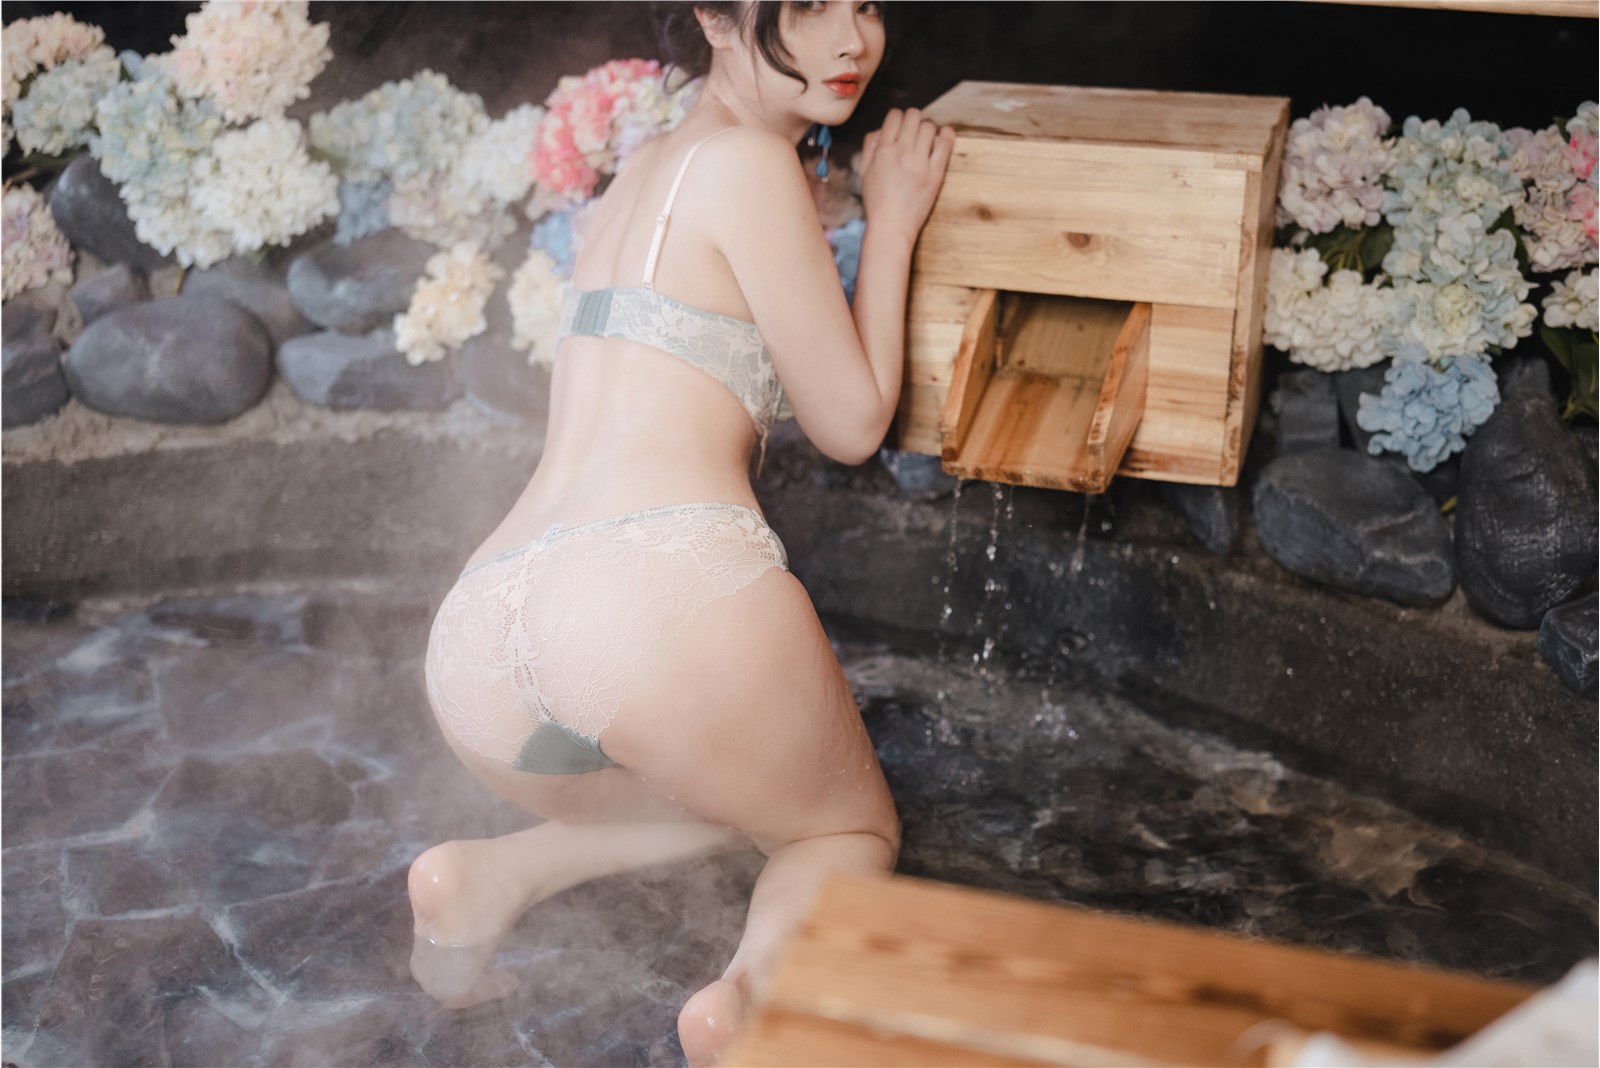 Rioko cool son NO. 081 years の rhyme on hot spring travel(3)